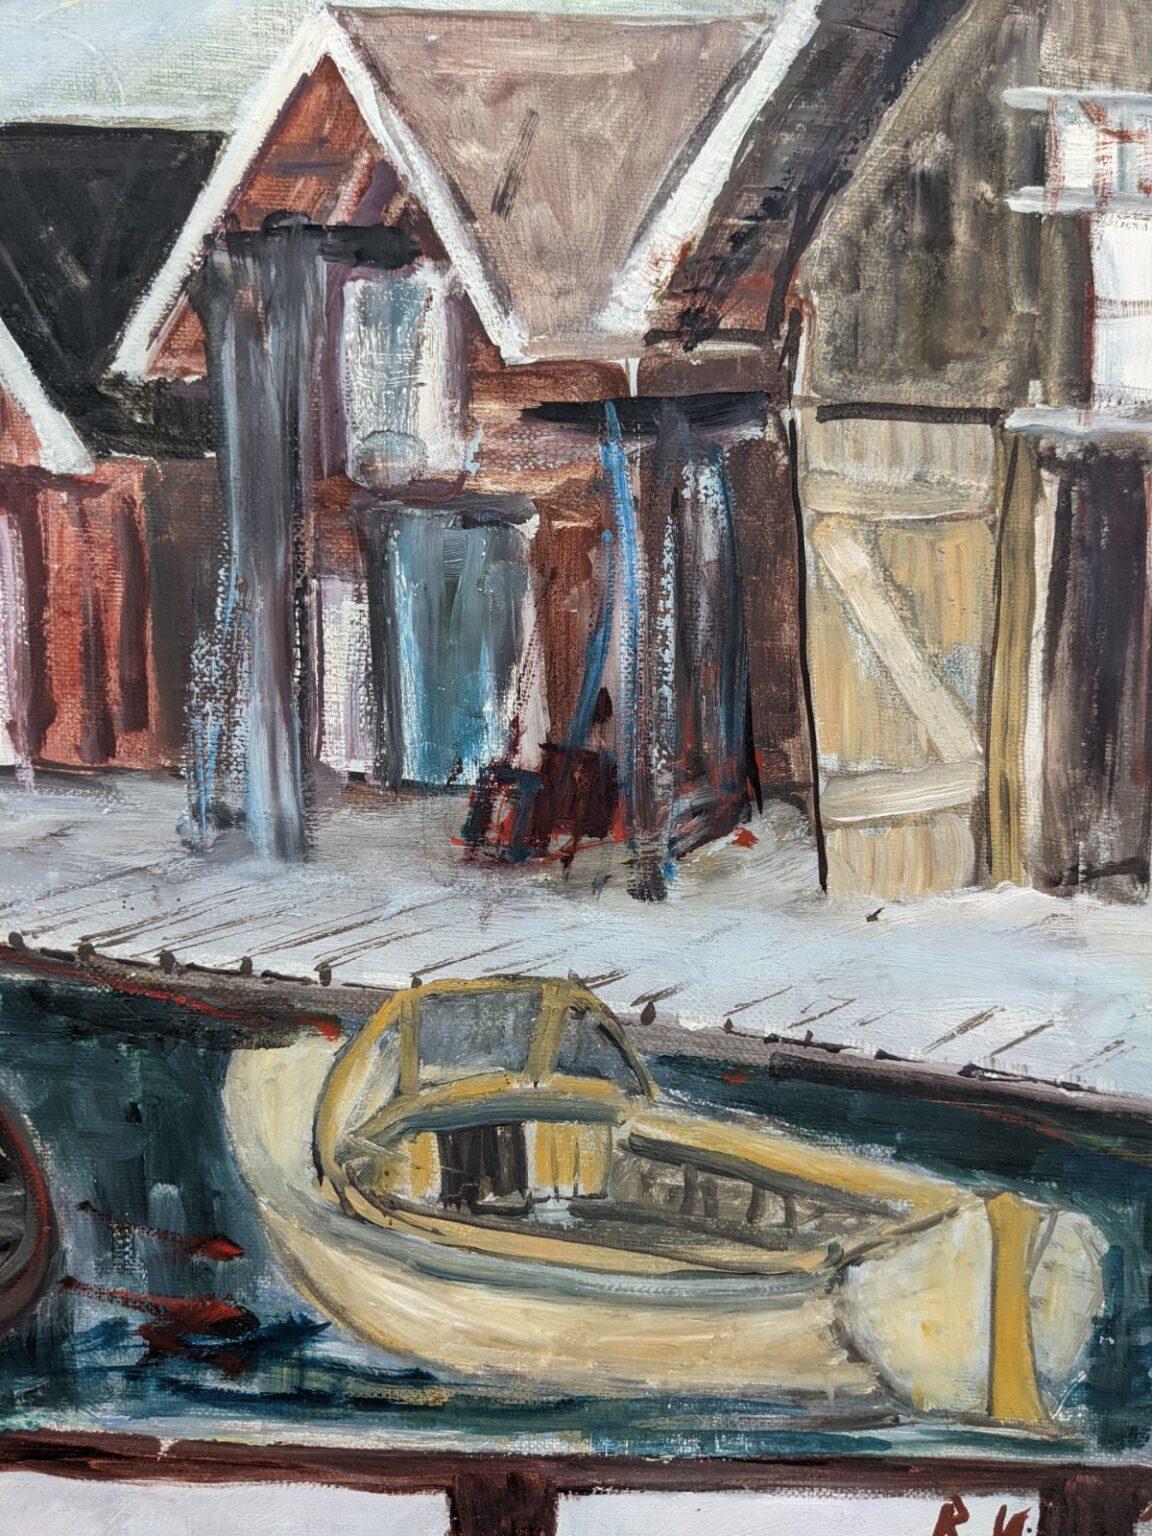 THE MARINA
Size: 49 x 57 cm (including frame)
Oil on canvas

A visually pleasing and charming modernist oil painting depicting a scene of a marina with several boats, and a row of huts that lined by the waterfront promenade.

The artist has used a